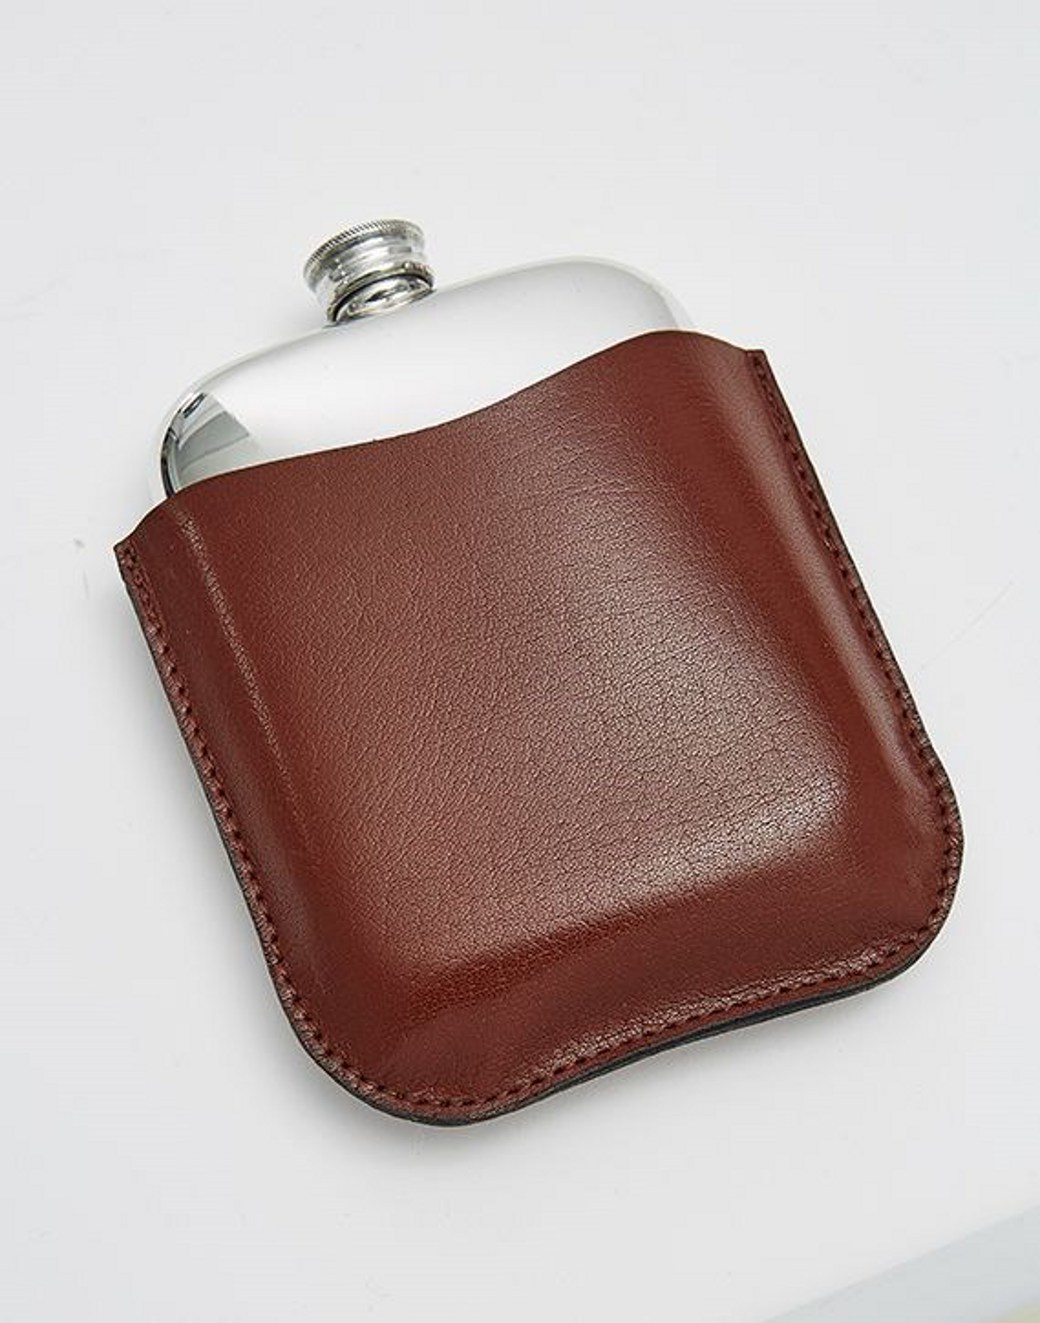 846 in leather pouch